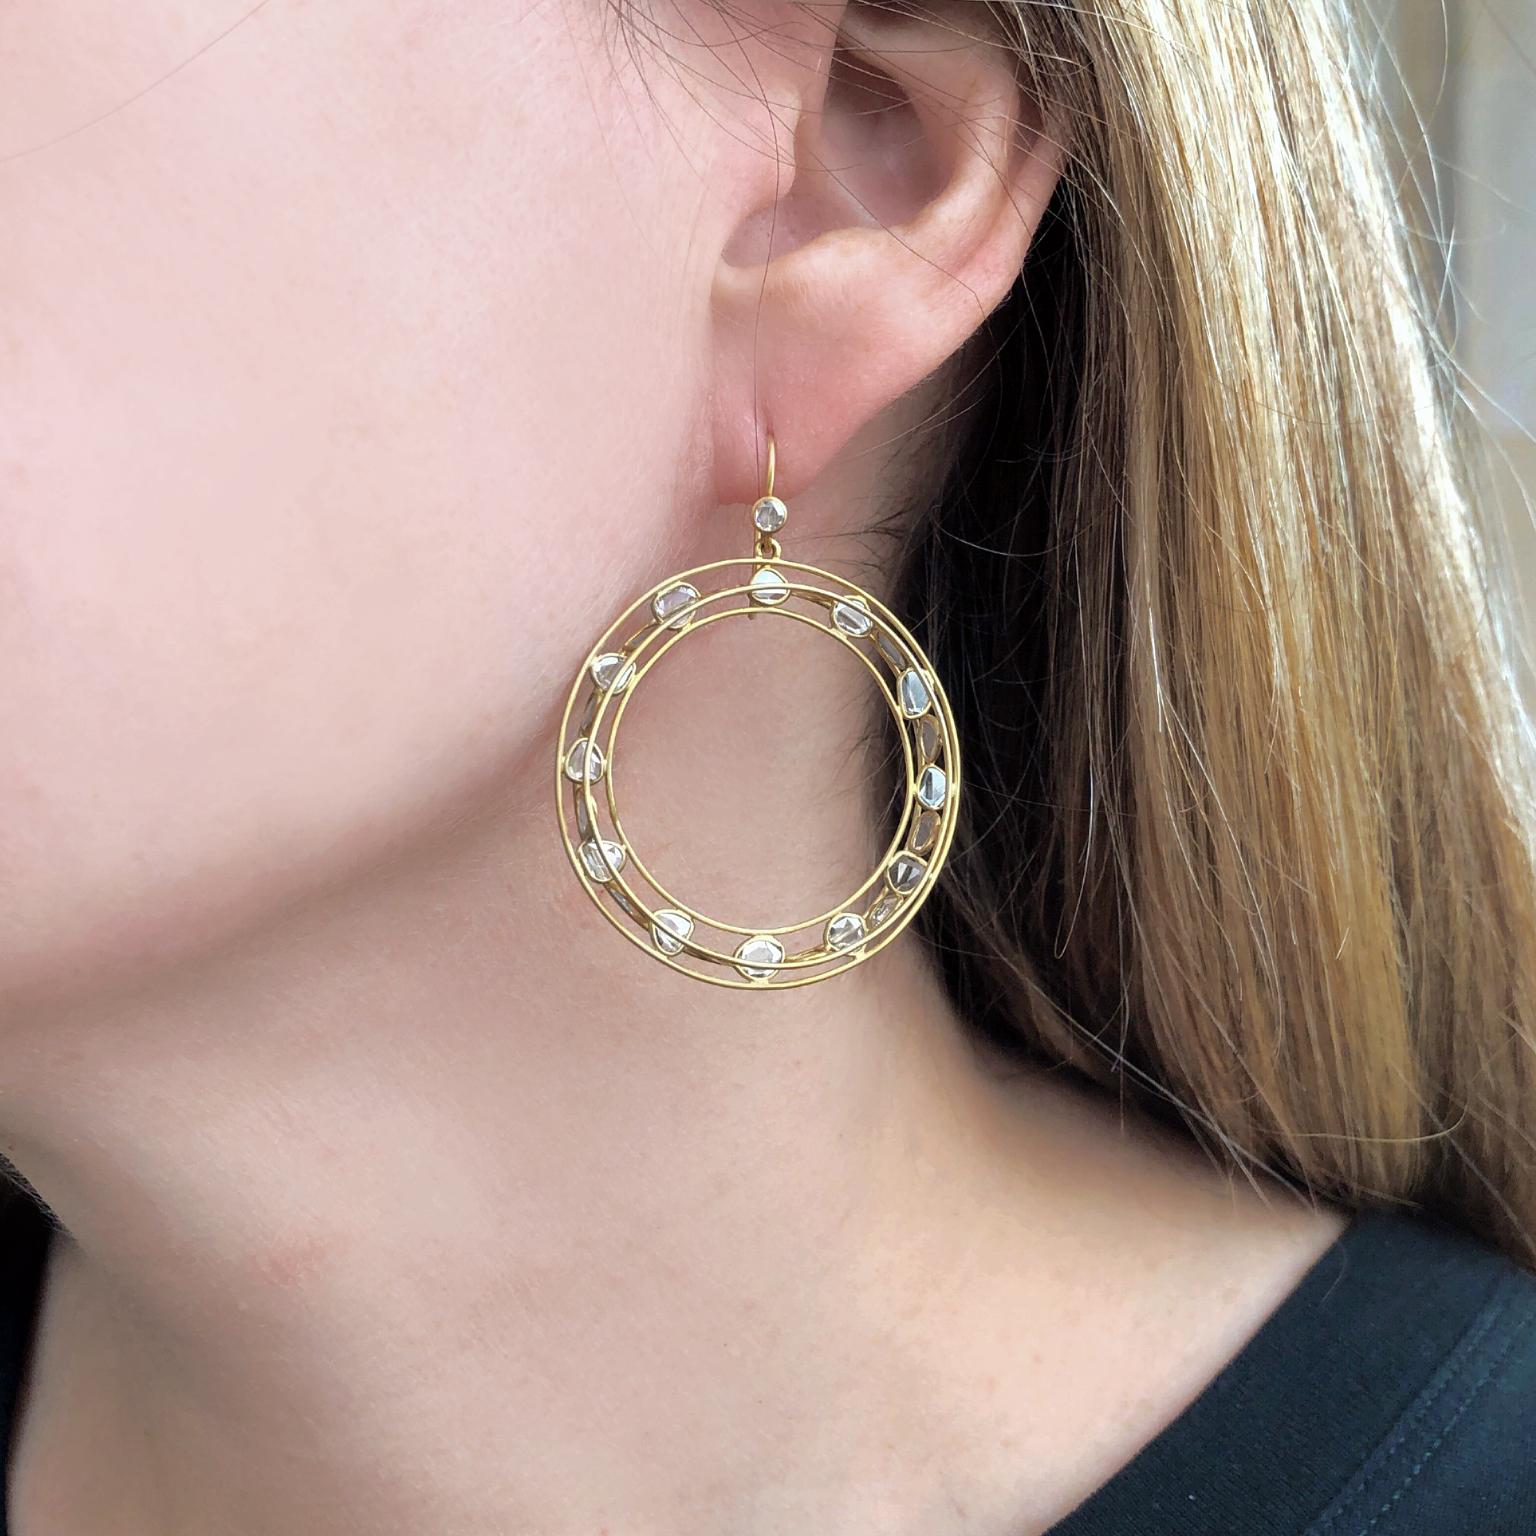 One of a Kind Dimension Hoop Earrings intricately handcrafted in matte-finished 18k yellow gold by Tej Kothari showcasing 48 white polki diamonds totaling 3.12 carats accented with rose-cut white diamond 18k yellow gold wires.  Polki Diamonds